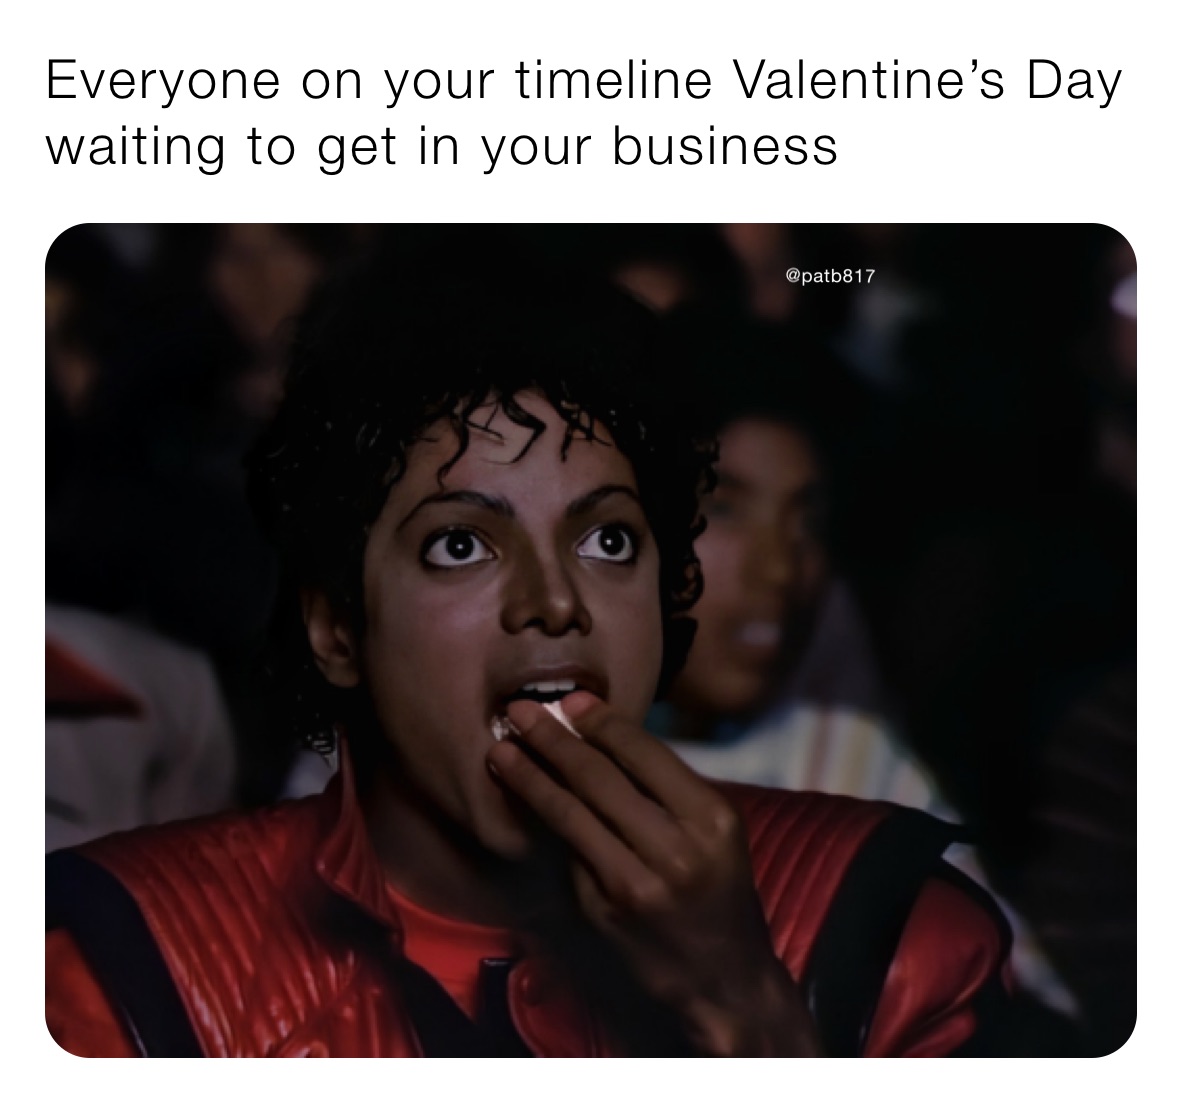 Everyone on your timeline Valentine’s Day waiting to get in your business